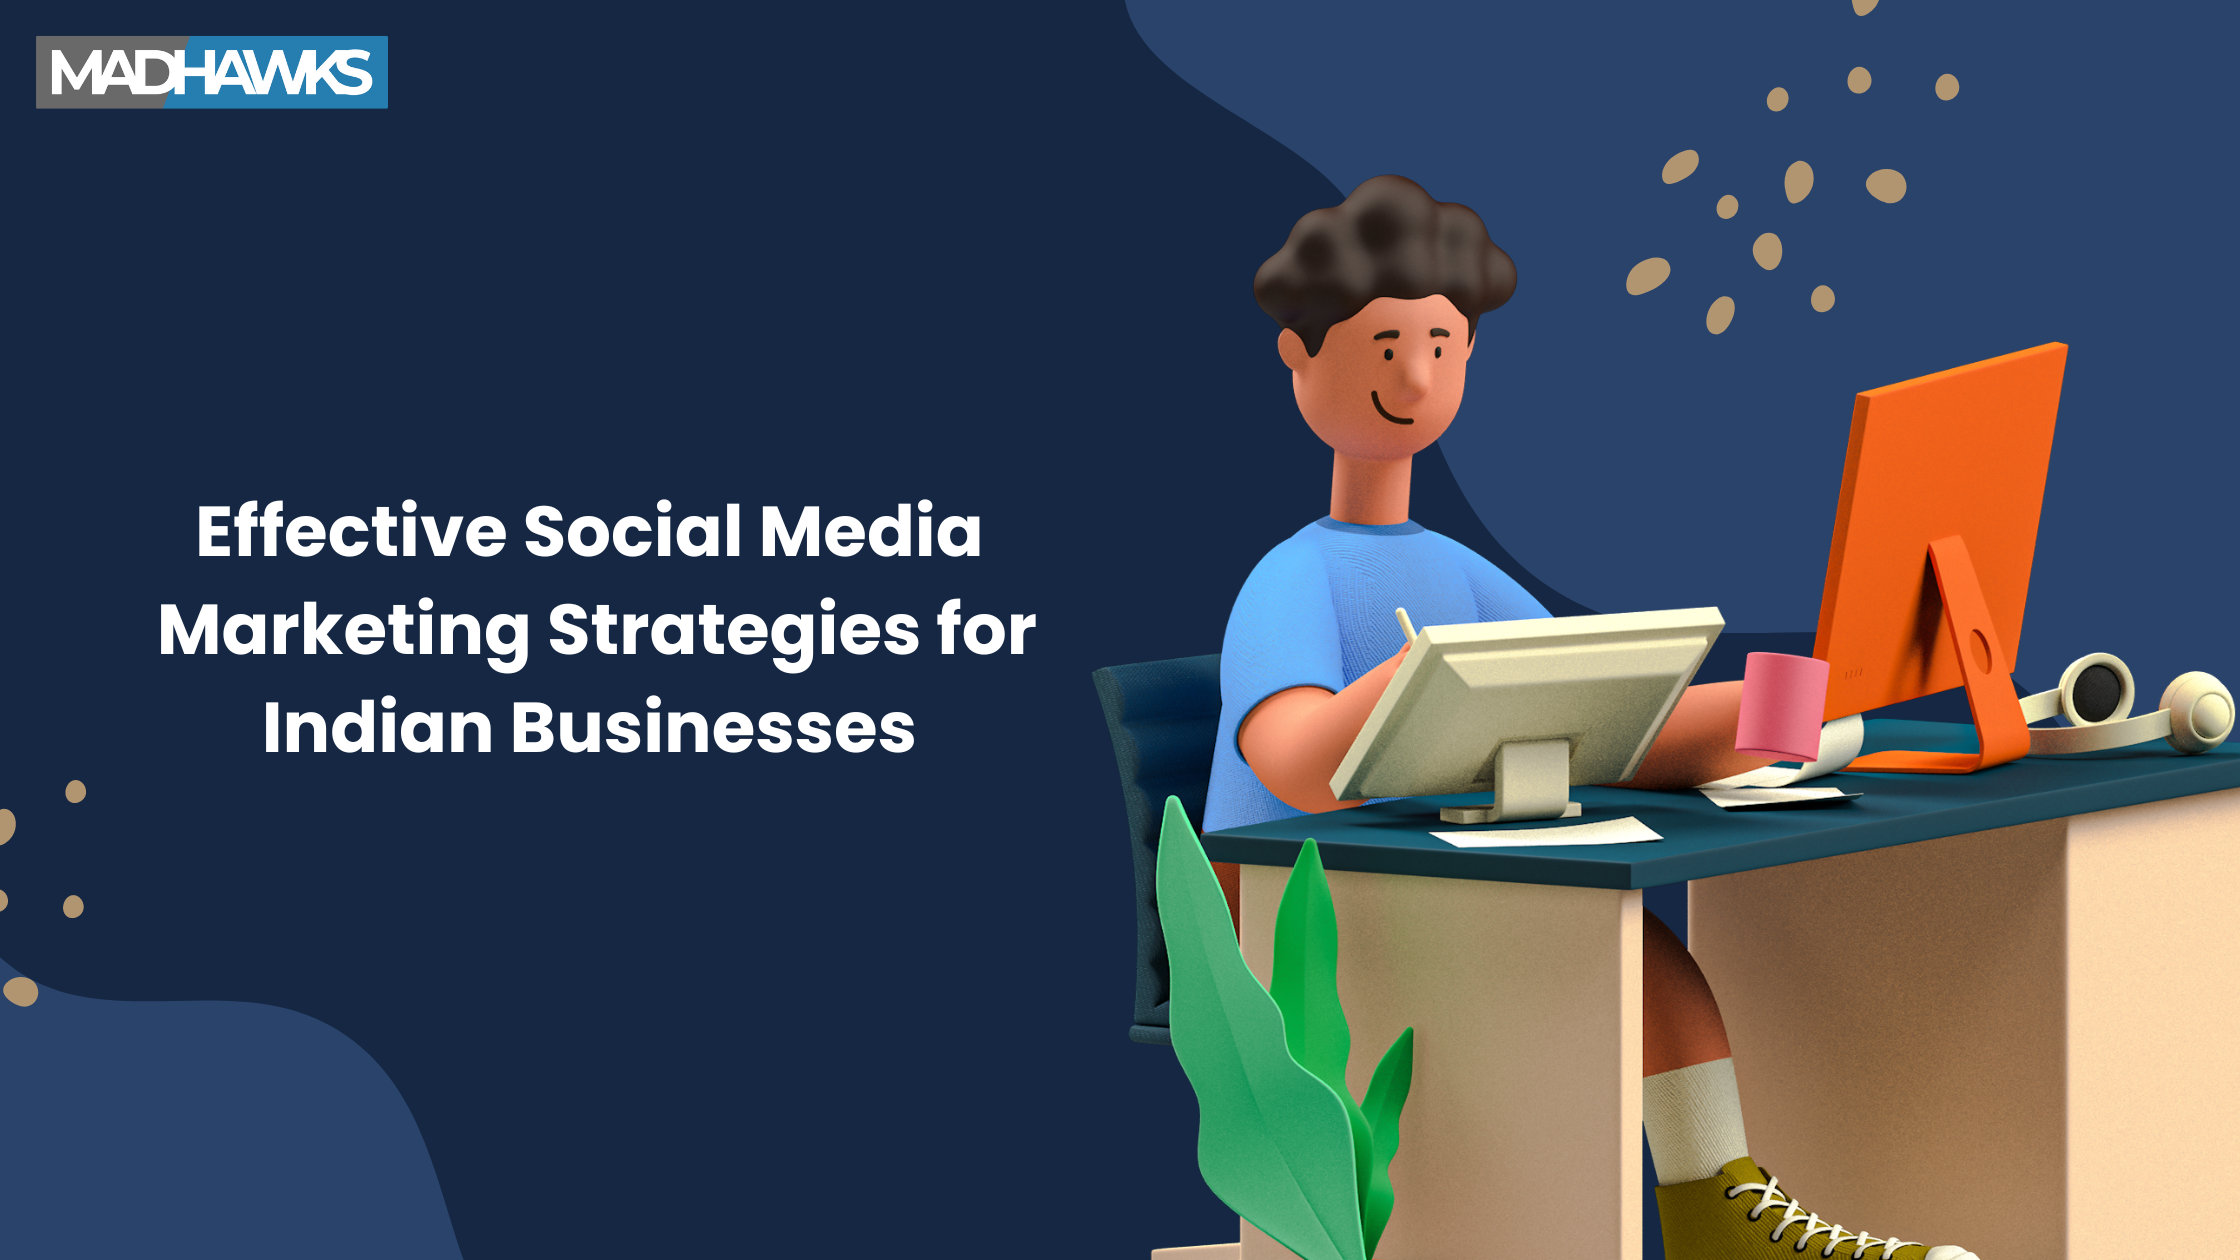 Effective Social Media Marketing Strategies for Indian Businesses